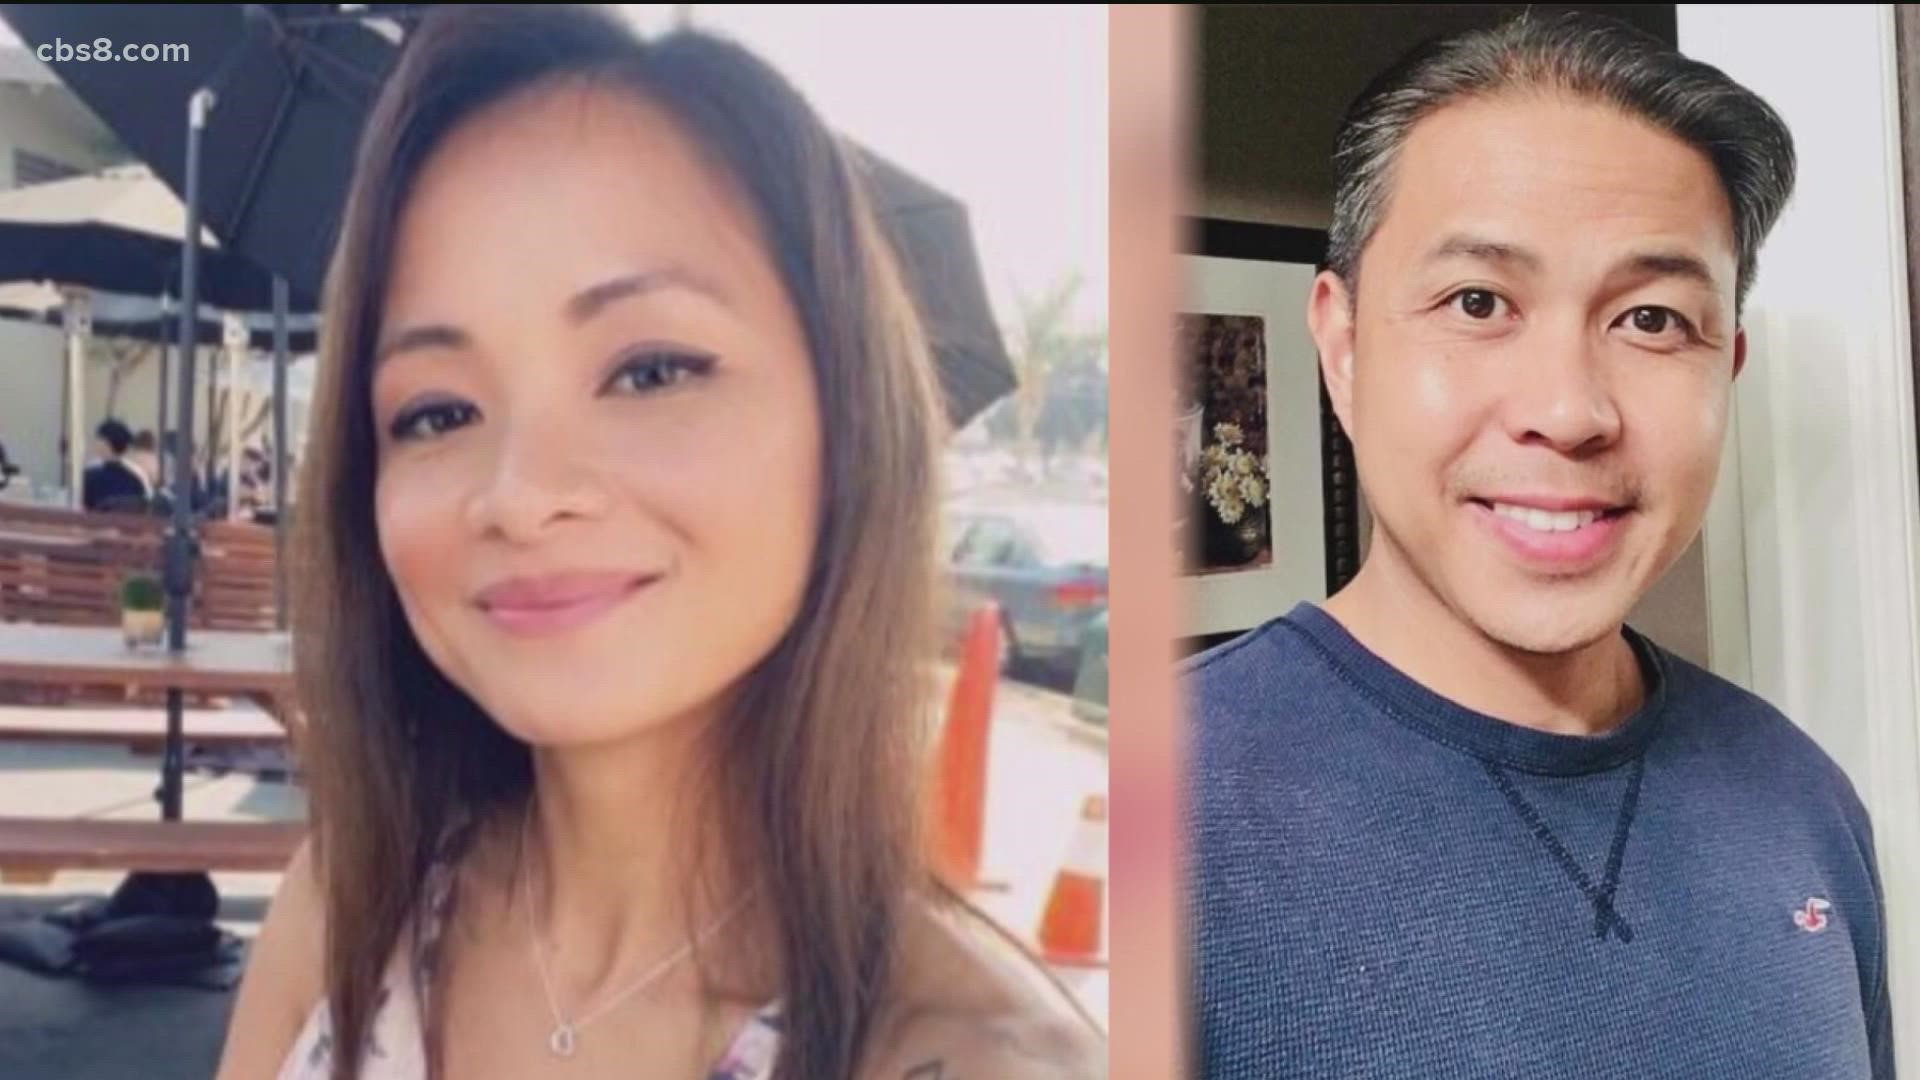 Chula Vista mother May "Maya" Millete was last seen on Jan. 7 and a police search started shortly after. Her husband Larry was arrested Oct. 19. Here is what we know